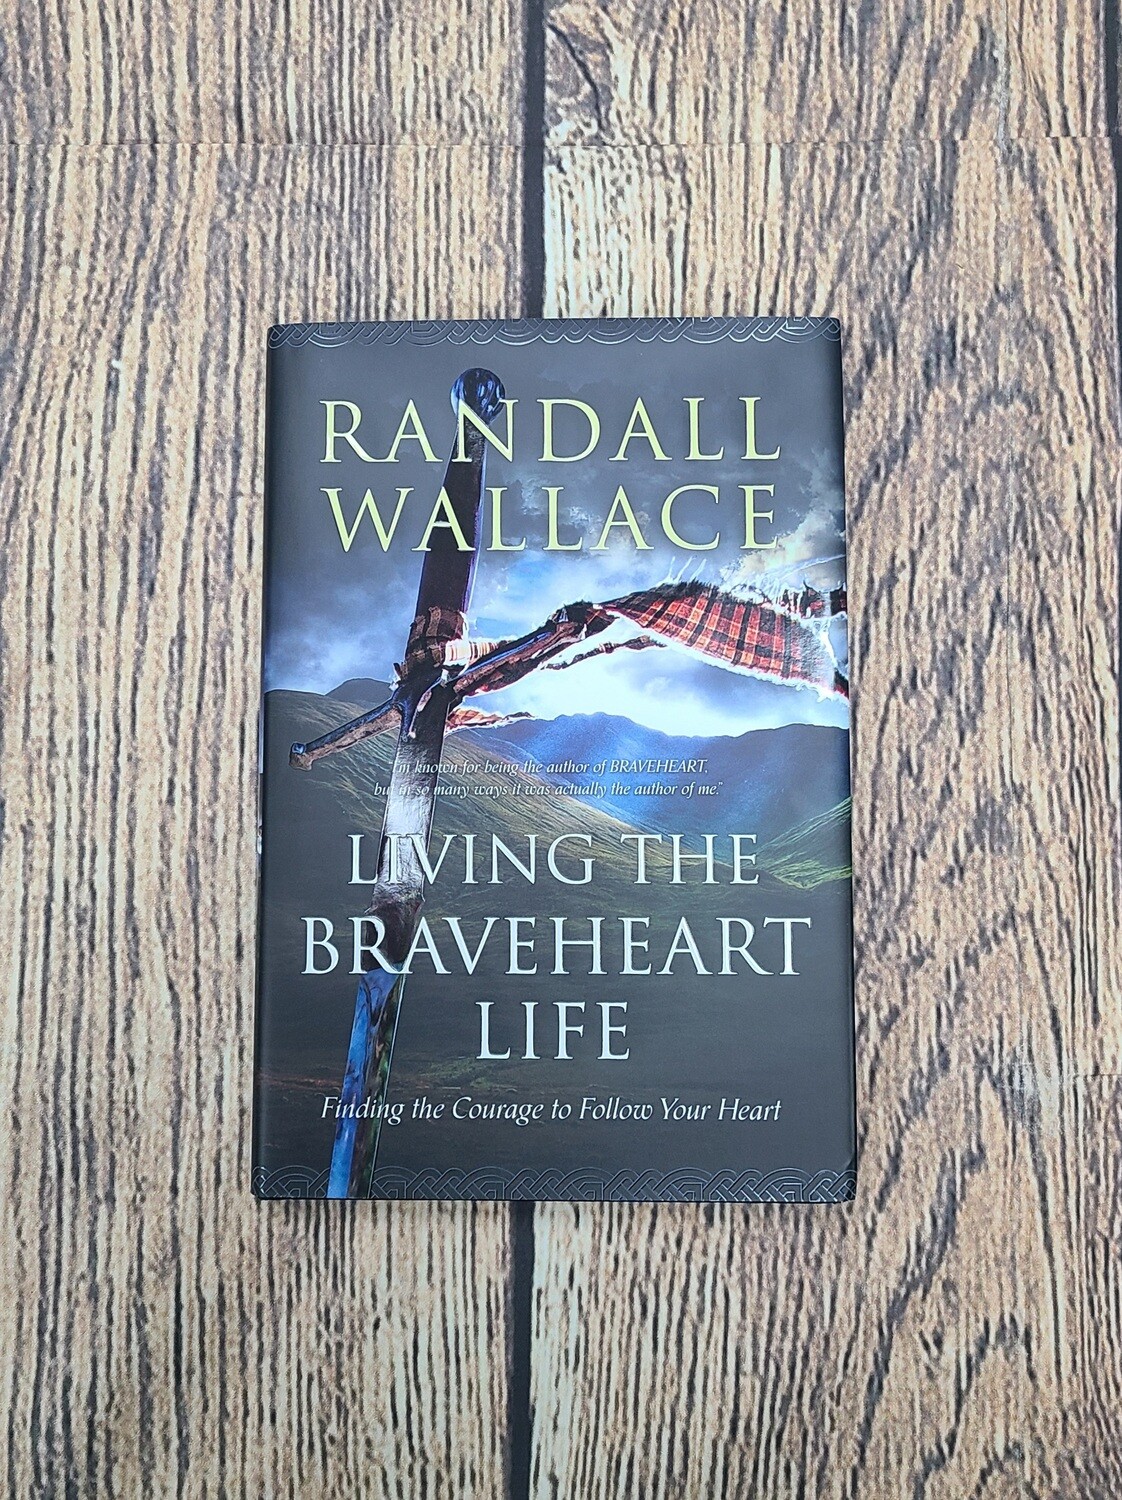 Living the Braveheart Life by Randall Wallace